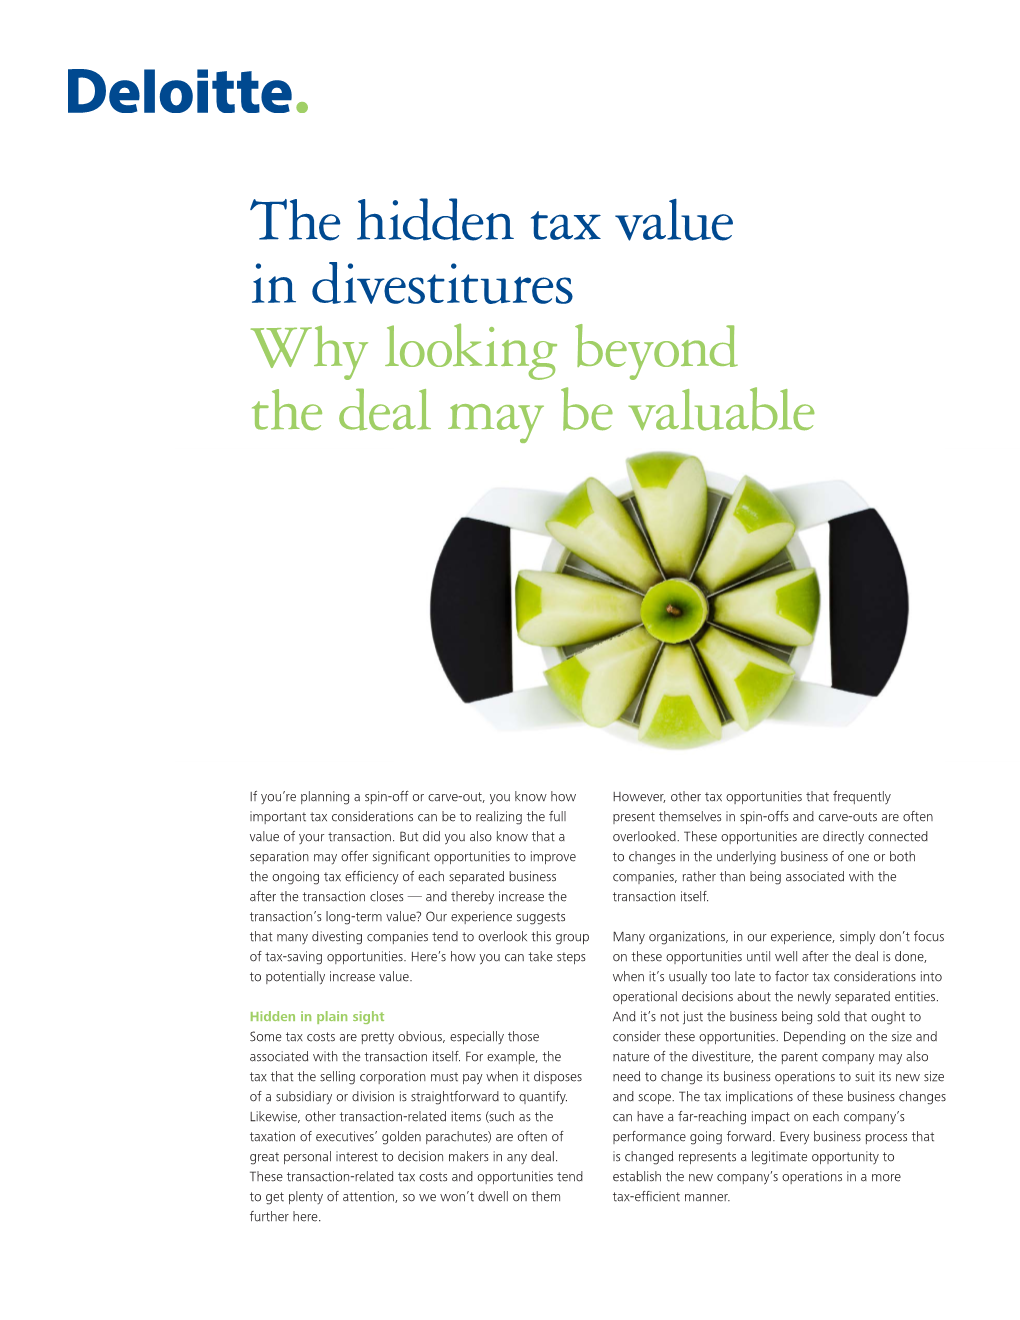 The Hidden Tax Value in Divestitures Why Looking Beyond the Deal May Be Valuable